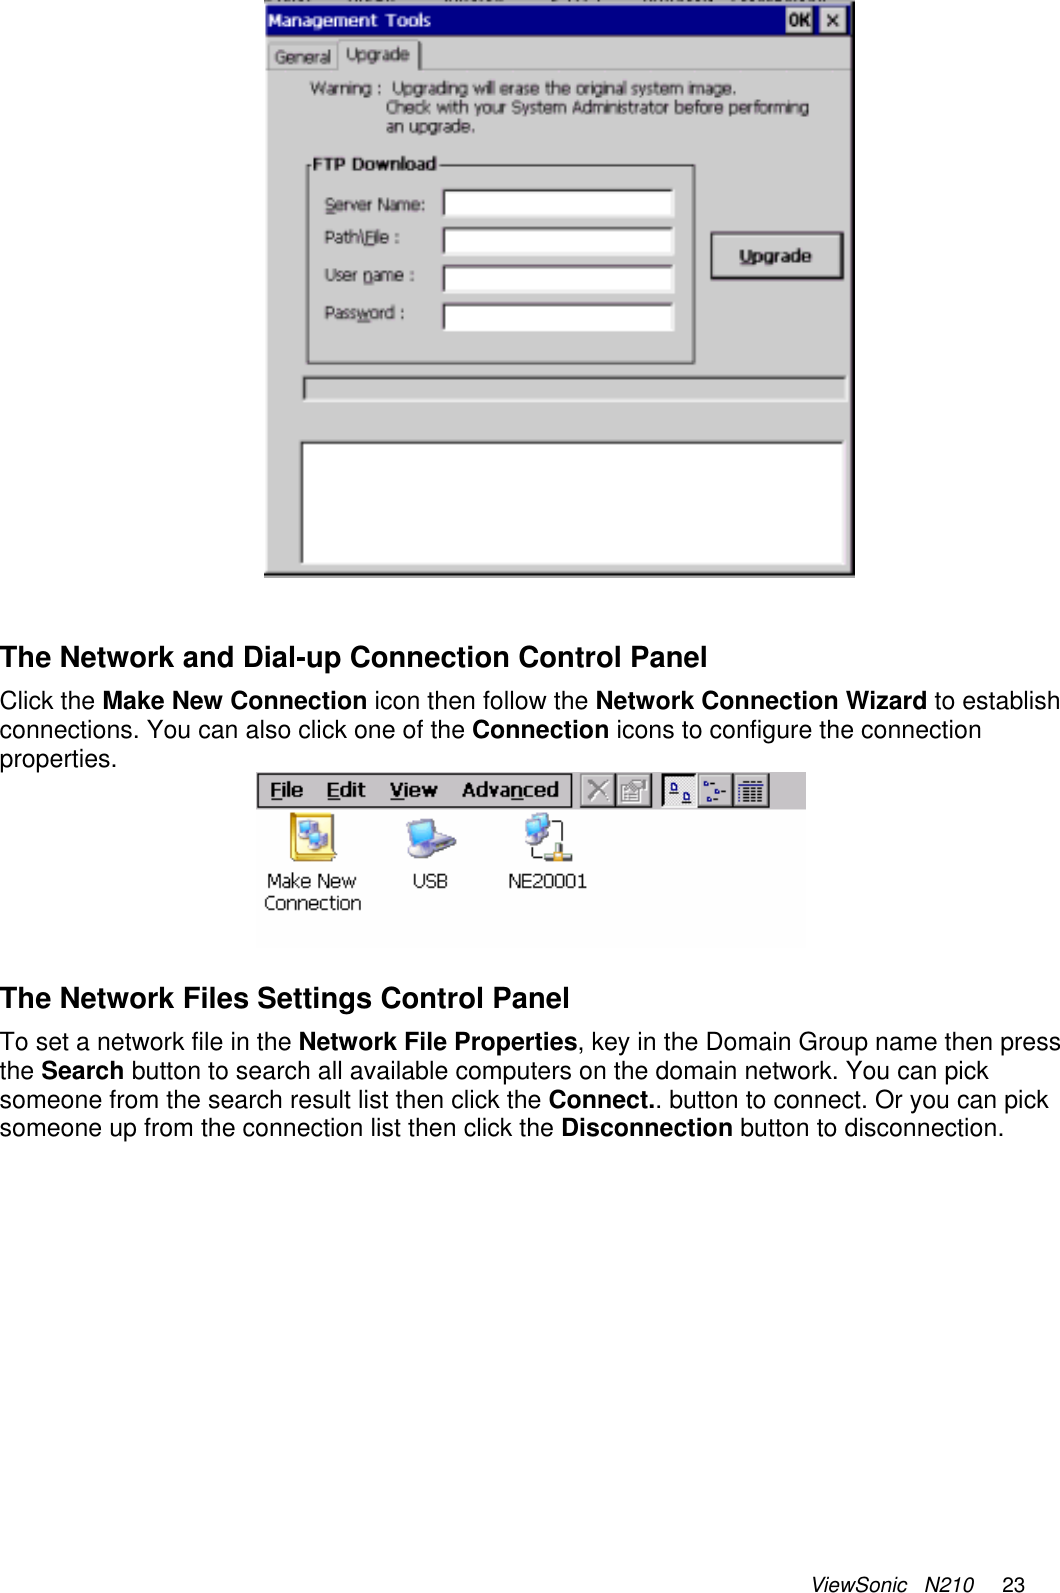 ViewSonic   N210     23    The Network and Dial-up Connection Control Panel Click the Make New Connection icon then follow the Network Connection Wizard to establish connections. You can also click one of the Connection icons to configure the connection properties.   The Network Files Settings Control Panel To set a network file in the Network File Properties, key in the Domain Group name then press the Search button to search all available computers on the domain network. You can pick someone from the search result list then click the Connect.. button to connect. Or you can pick someone up from the connection list then click the Disconnection button to disconnection.  